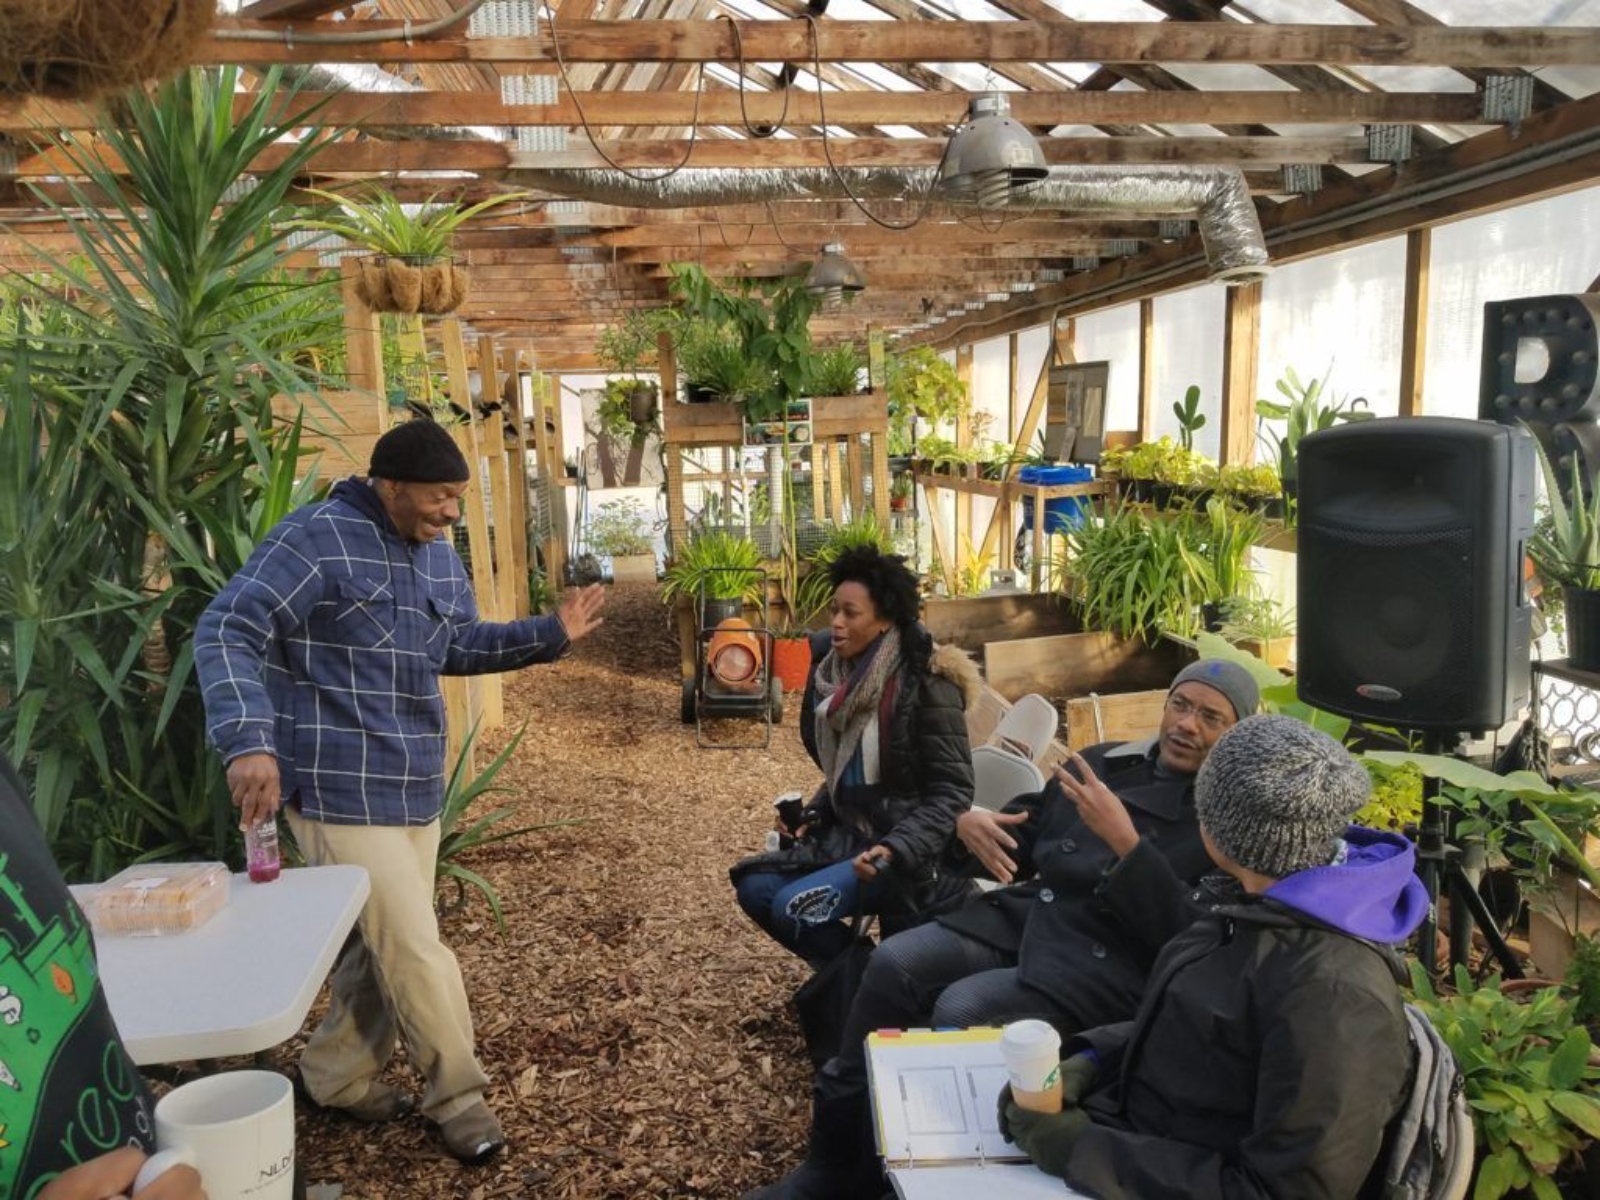 A group of people chat in a greenhouse filled with plants.